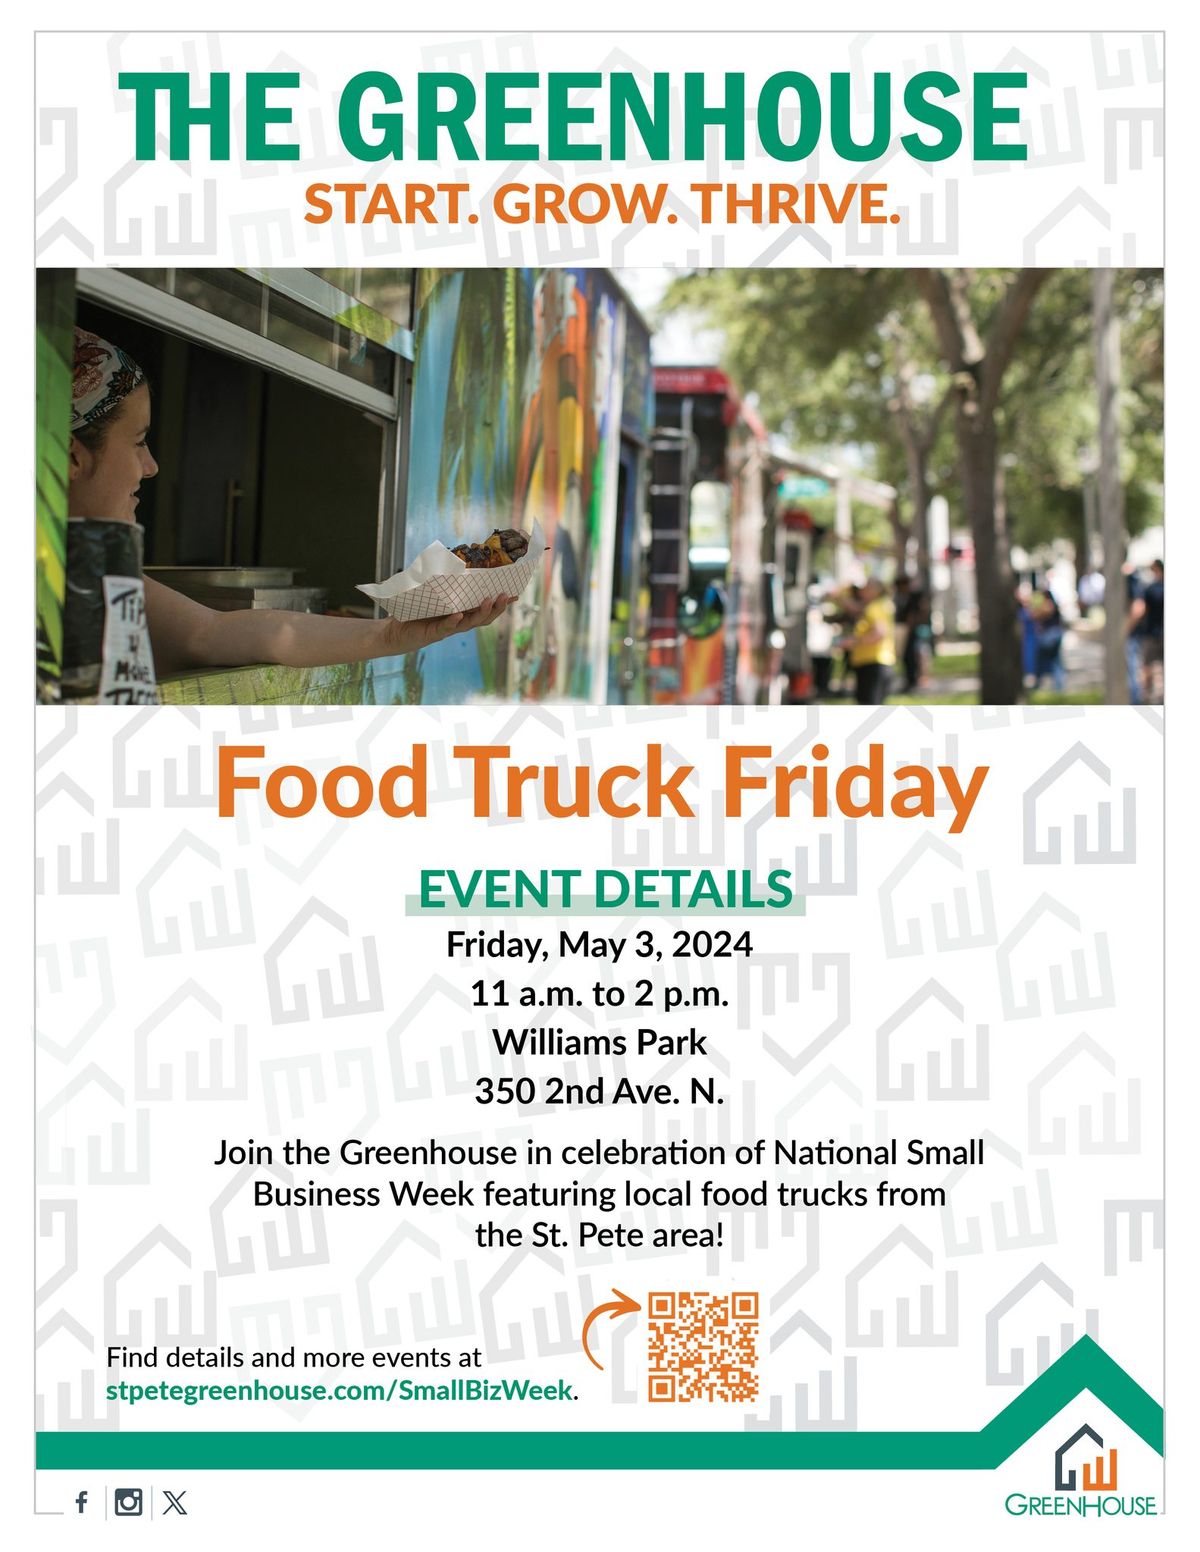 National Small Business Week: Food Truck Friday